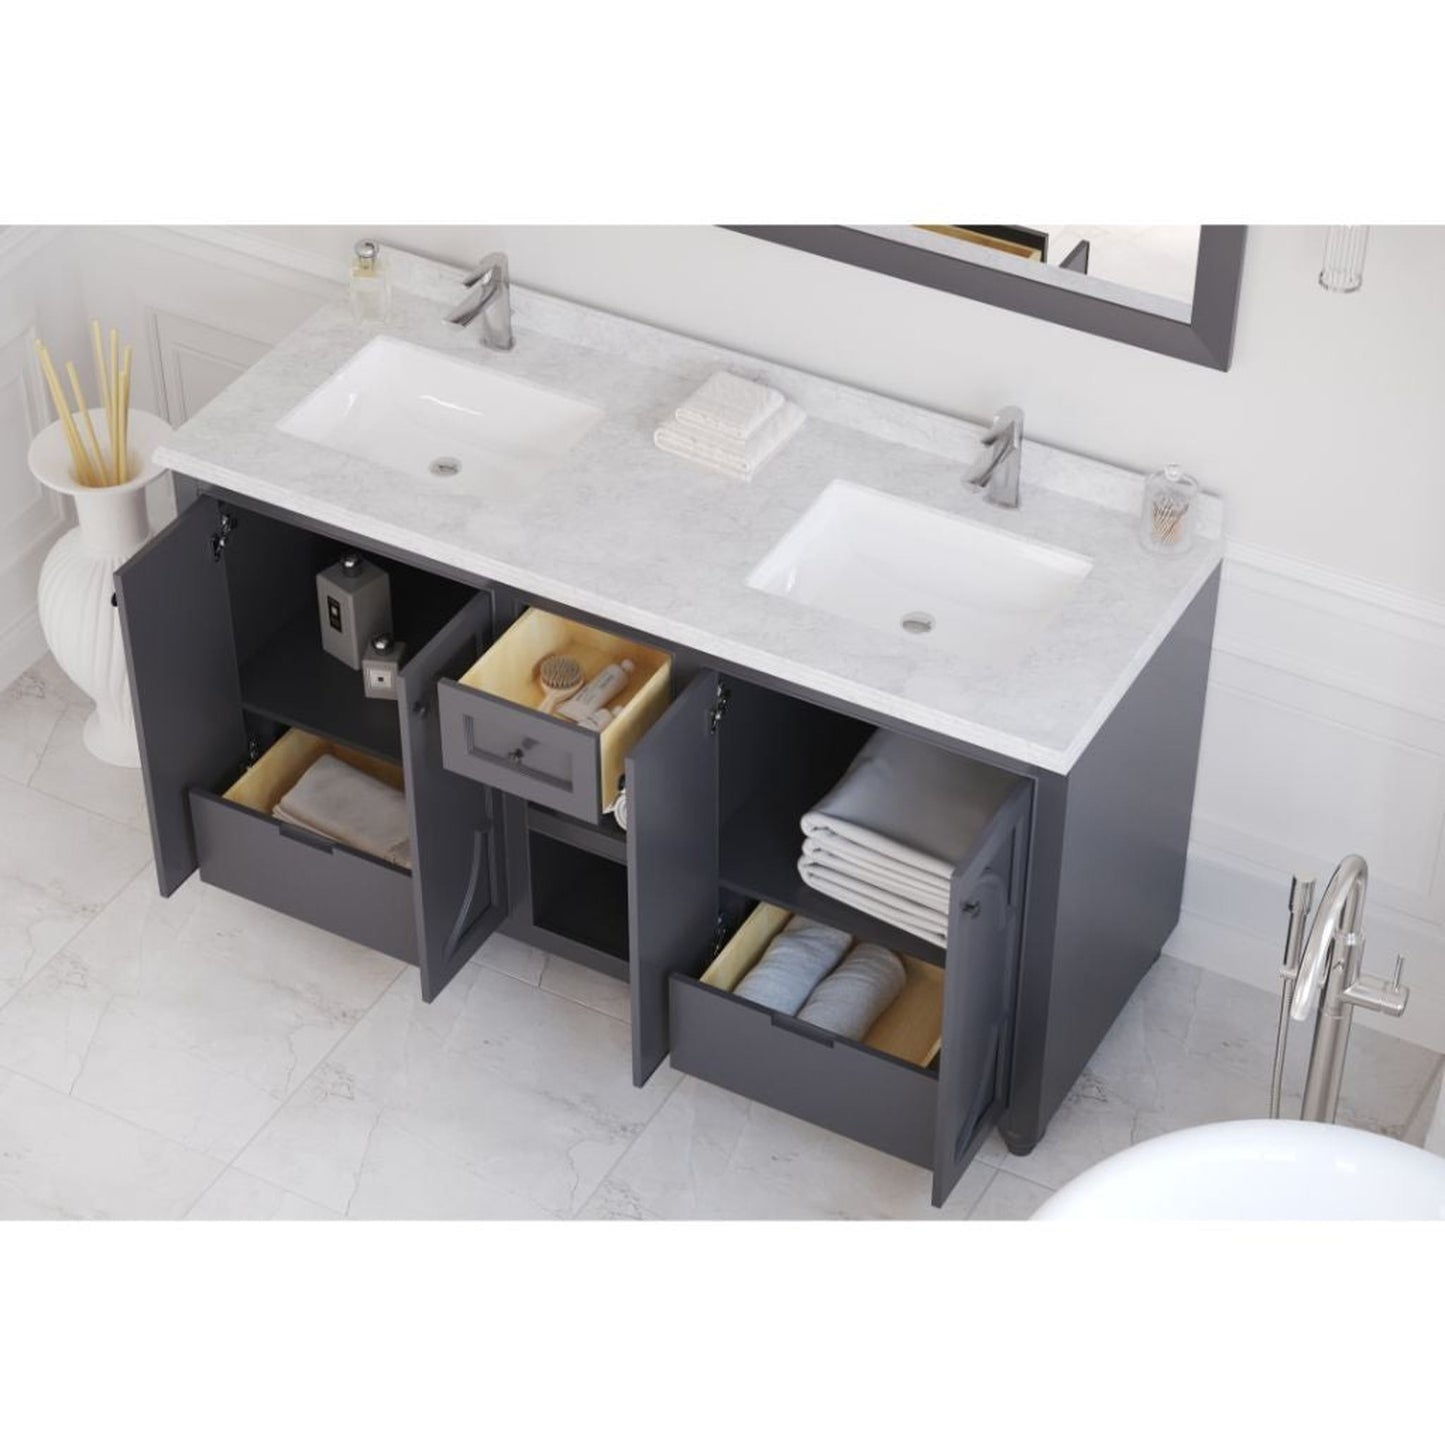 Laviva Odyssey 60" Maple Gray Vanity Base and White Carrara Marble Countertop With Double Rectangular Ceramic Sinks